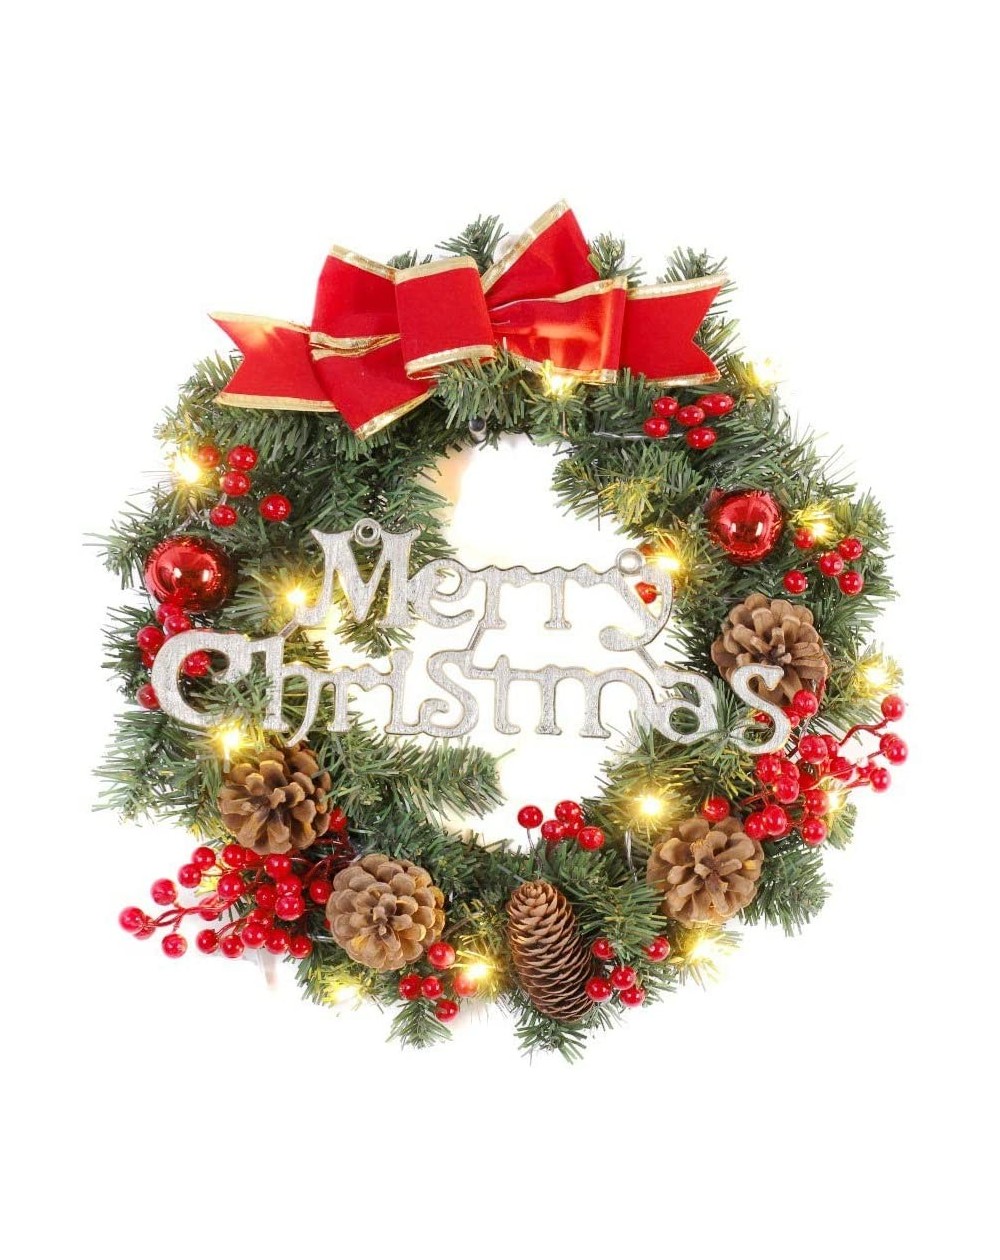 Wreaths Christmas Wreath with LED Light for Front Door Hanging Artificial Garland Bowknot Garland Xmas Decor Holiday Home Dec...